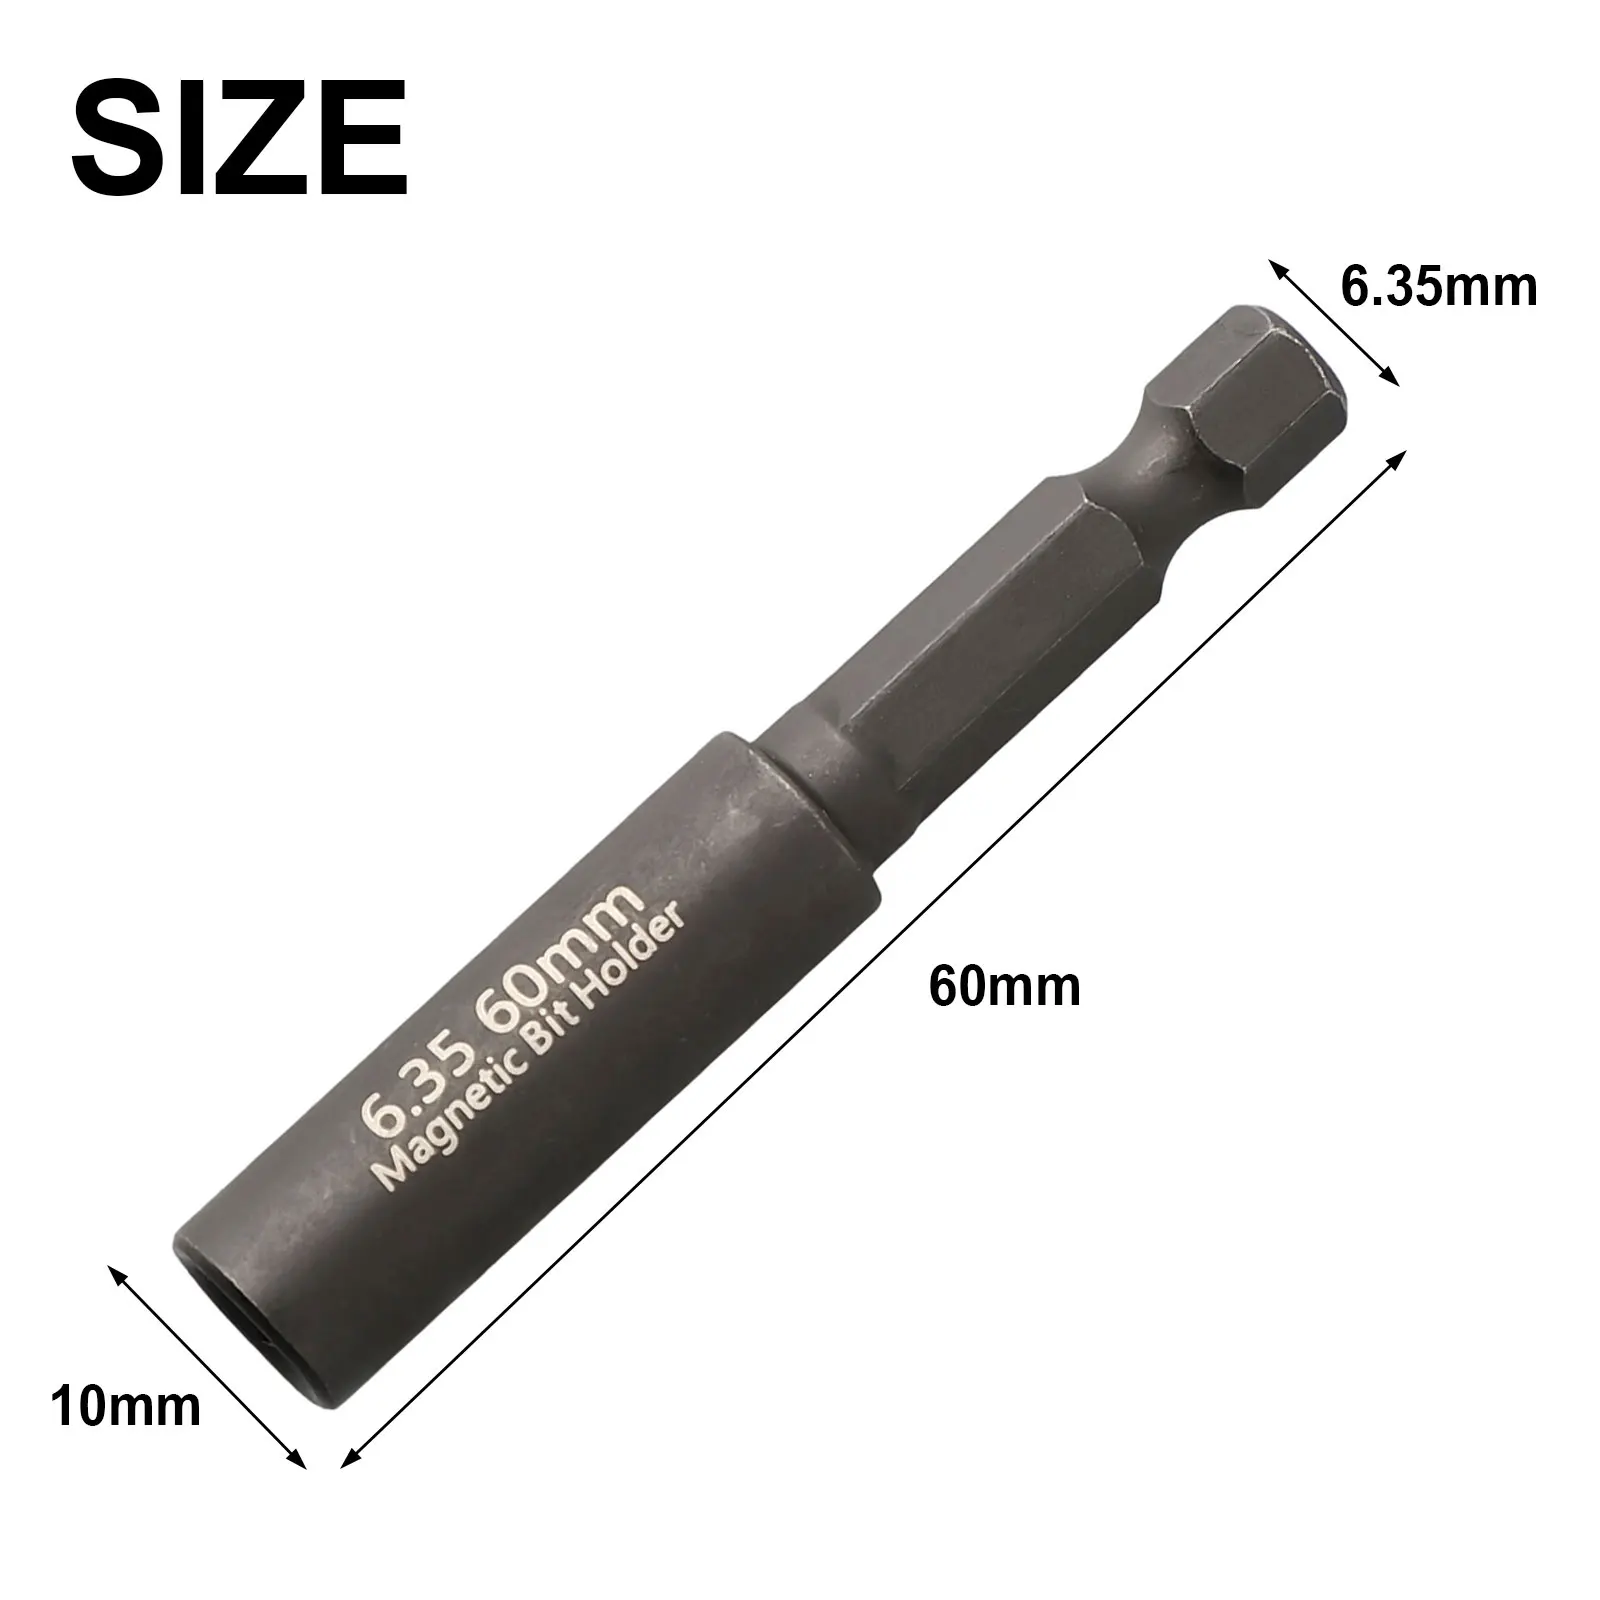 

Screwdriver Bit Holder 1/4Inch Hex Shank Head Extension Rod Quick Release Reliable Tool For Screwdriver Head Conversion